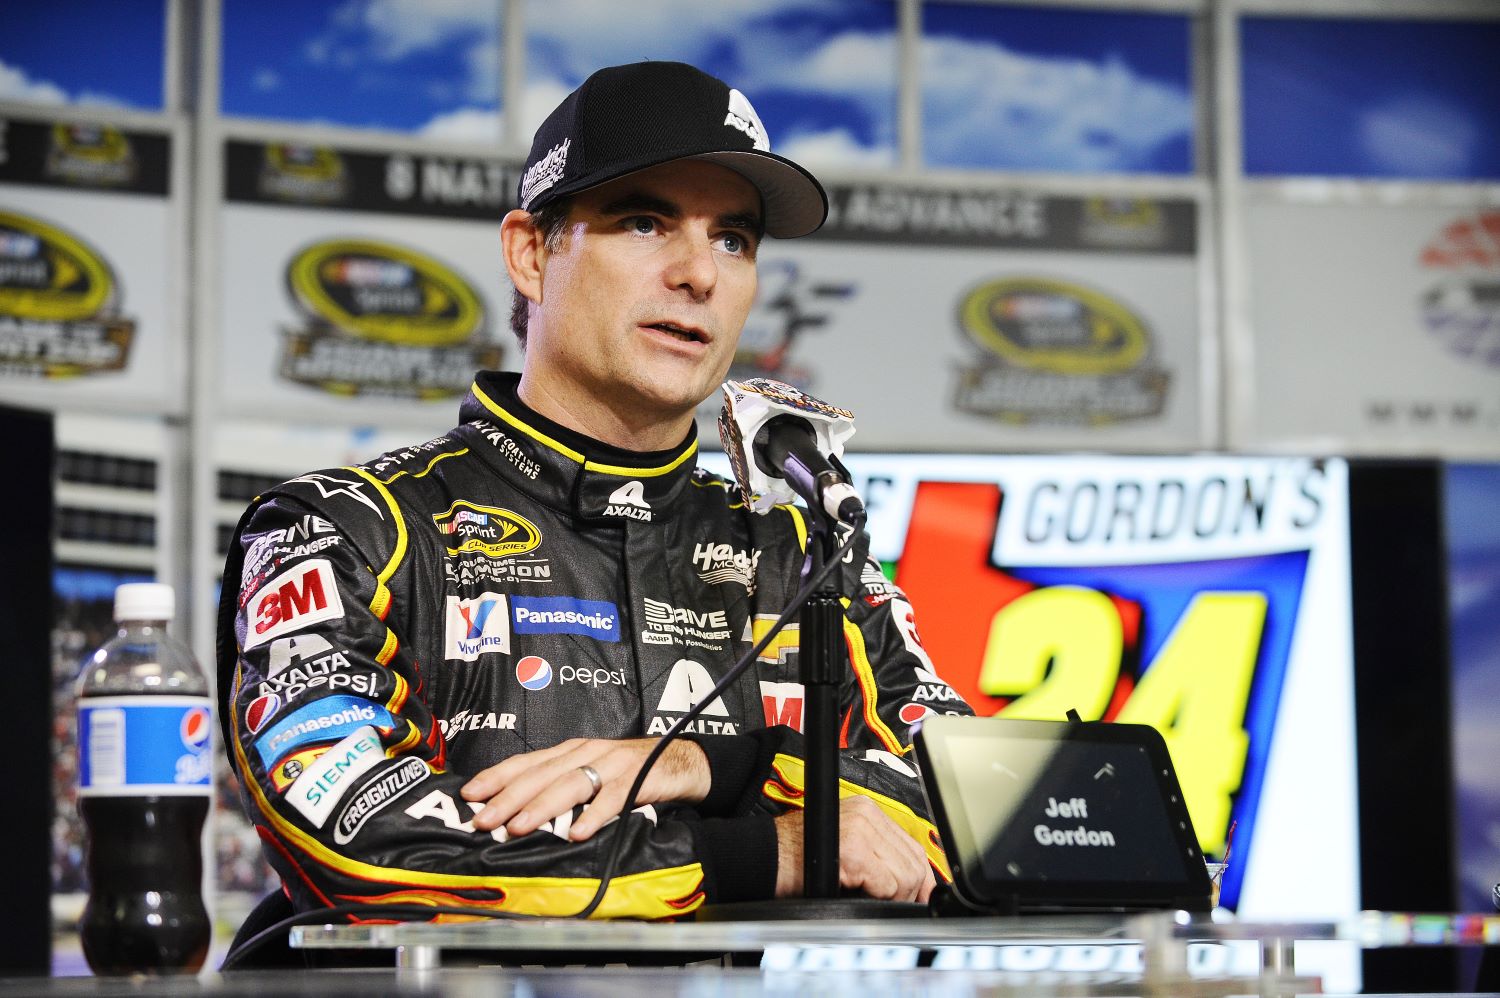 NASCAR Legend Jeff Gordon is Missing More Than $30 Million From His Bank Account Because of His Ex-Wife